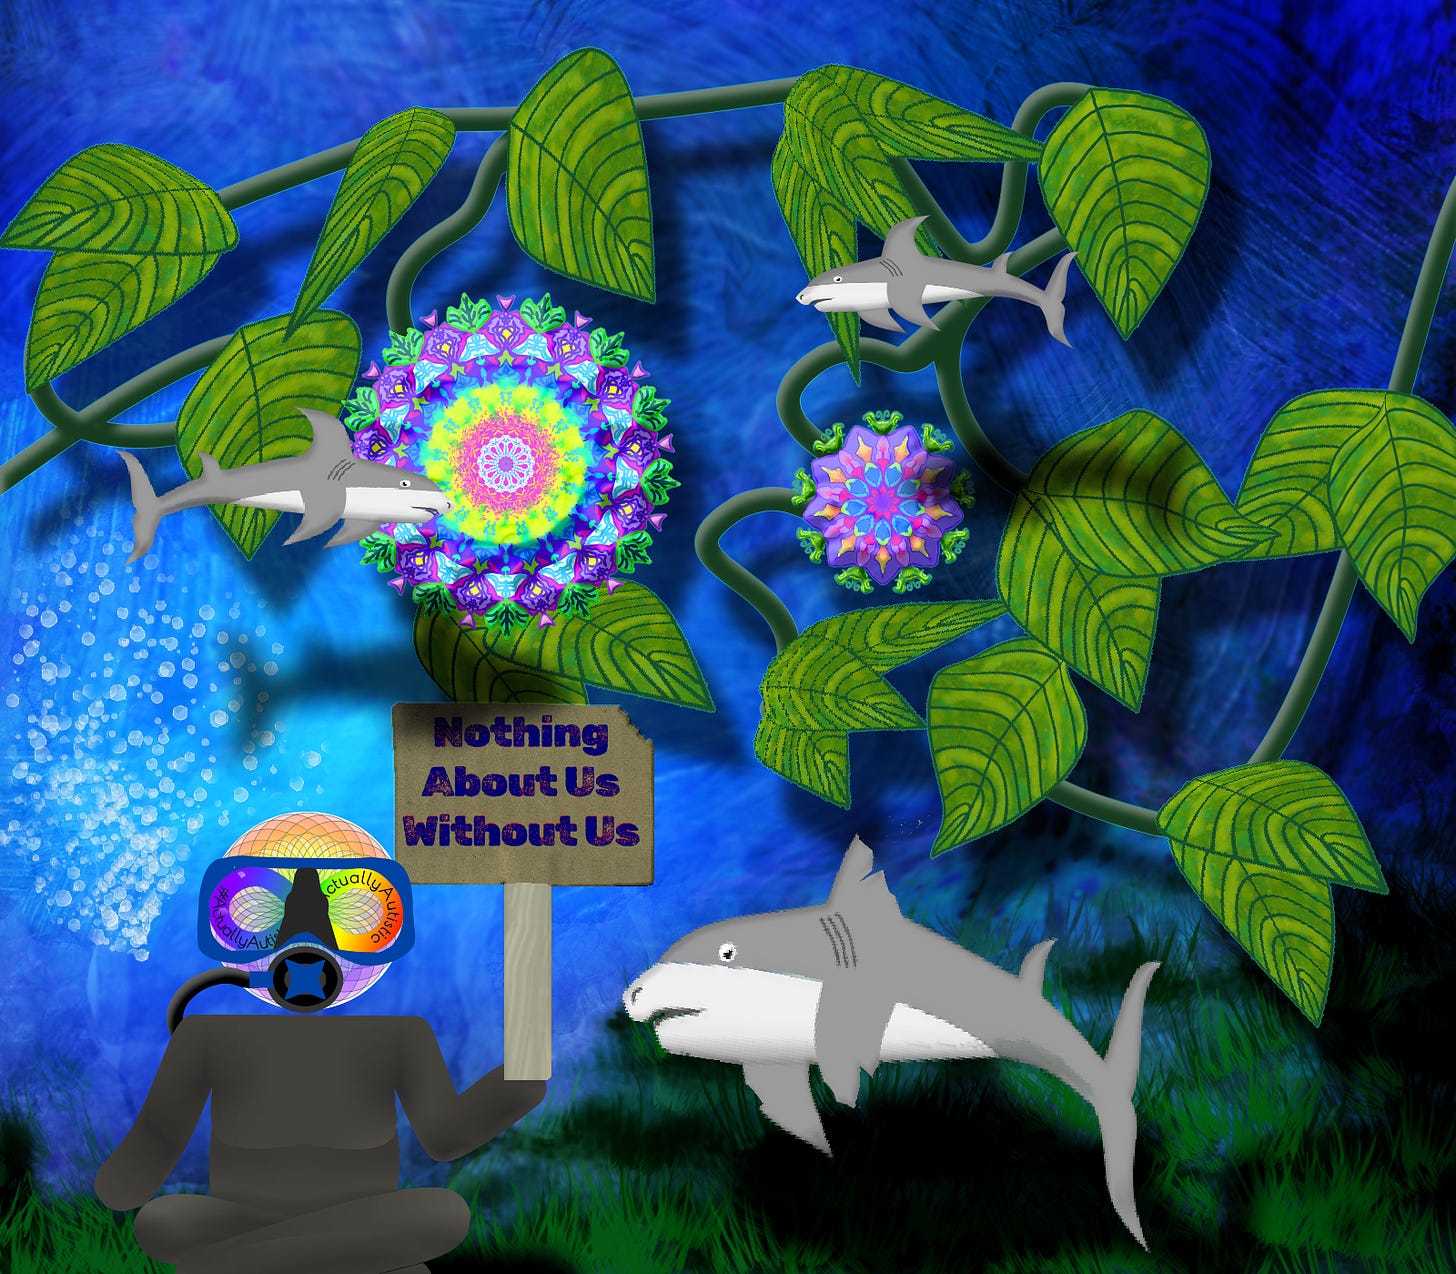 A surreal underwater garden. It has a vine snaking across with two giant multi-colored flowers and many leaves. Two sharks swim amongst the leaves. Another shark with several damaged fins swims at the bottom, next to a scuba diver sitting on the ground with a protest sign that says “Nothing About Us Without Us.”